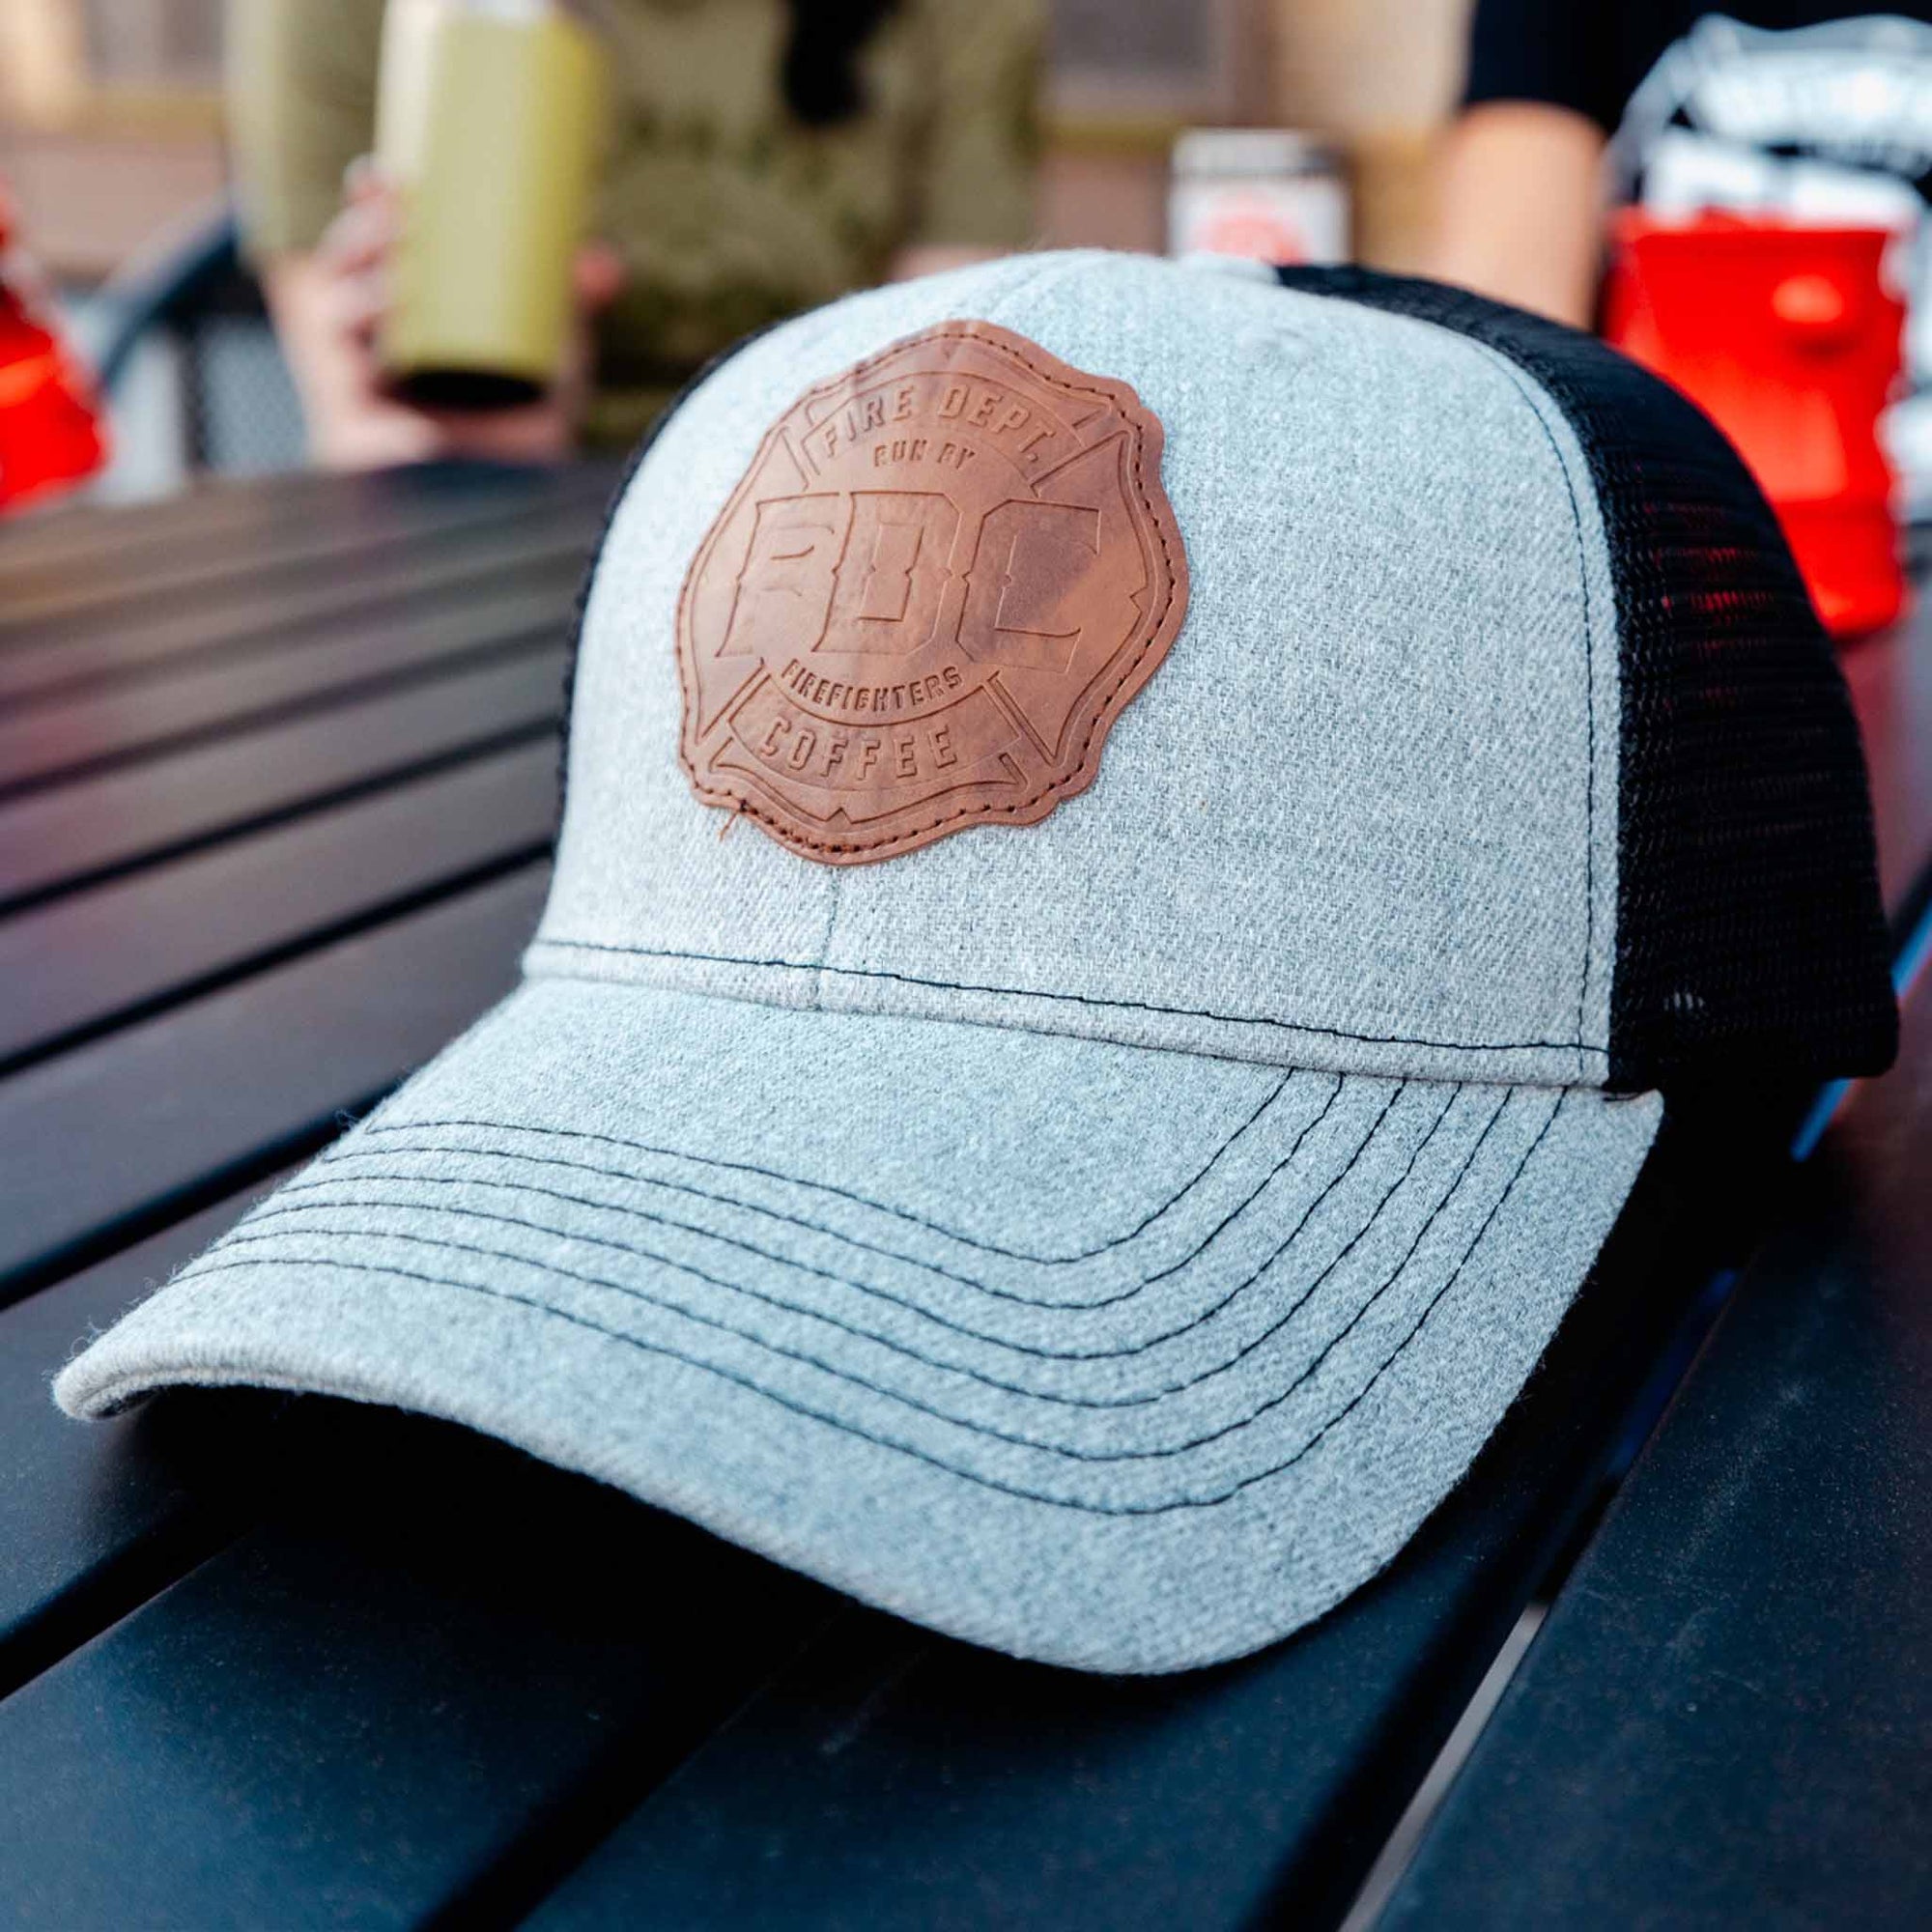 LEATHER PATCH HAT - GRAY